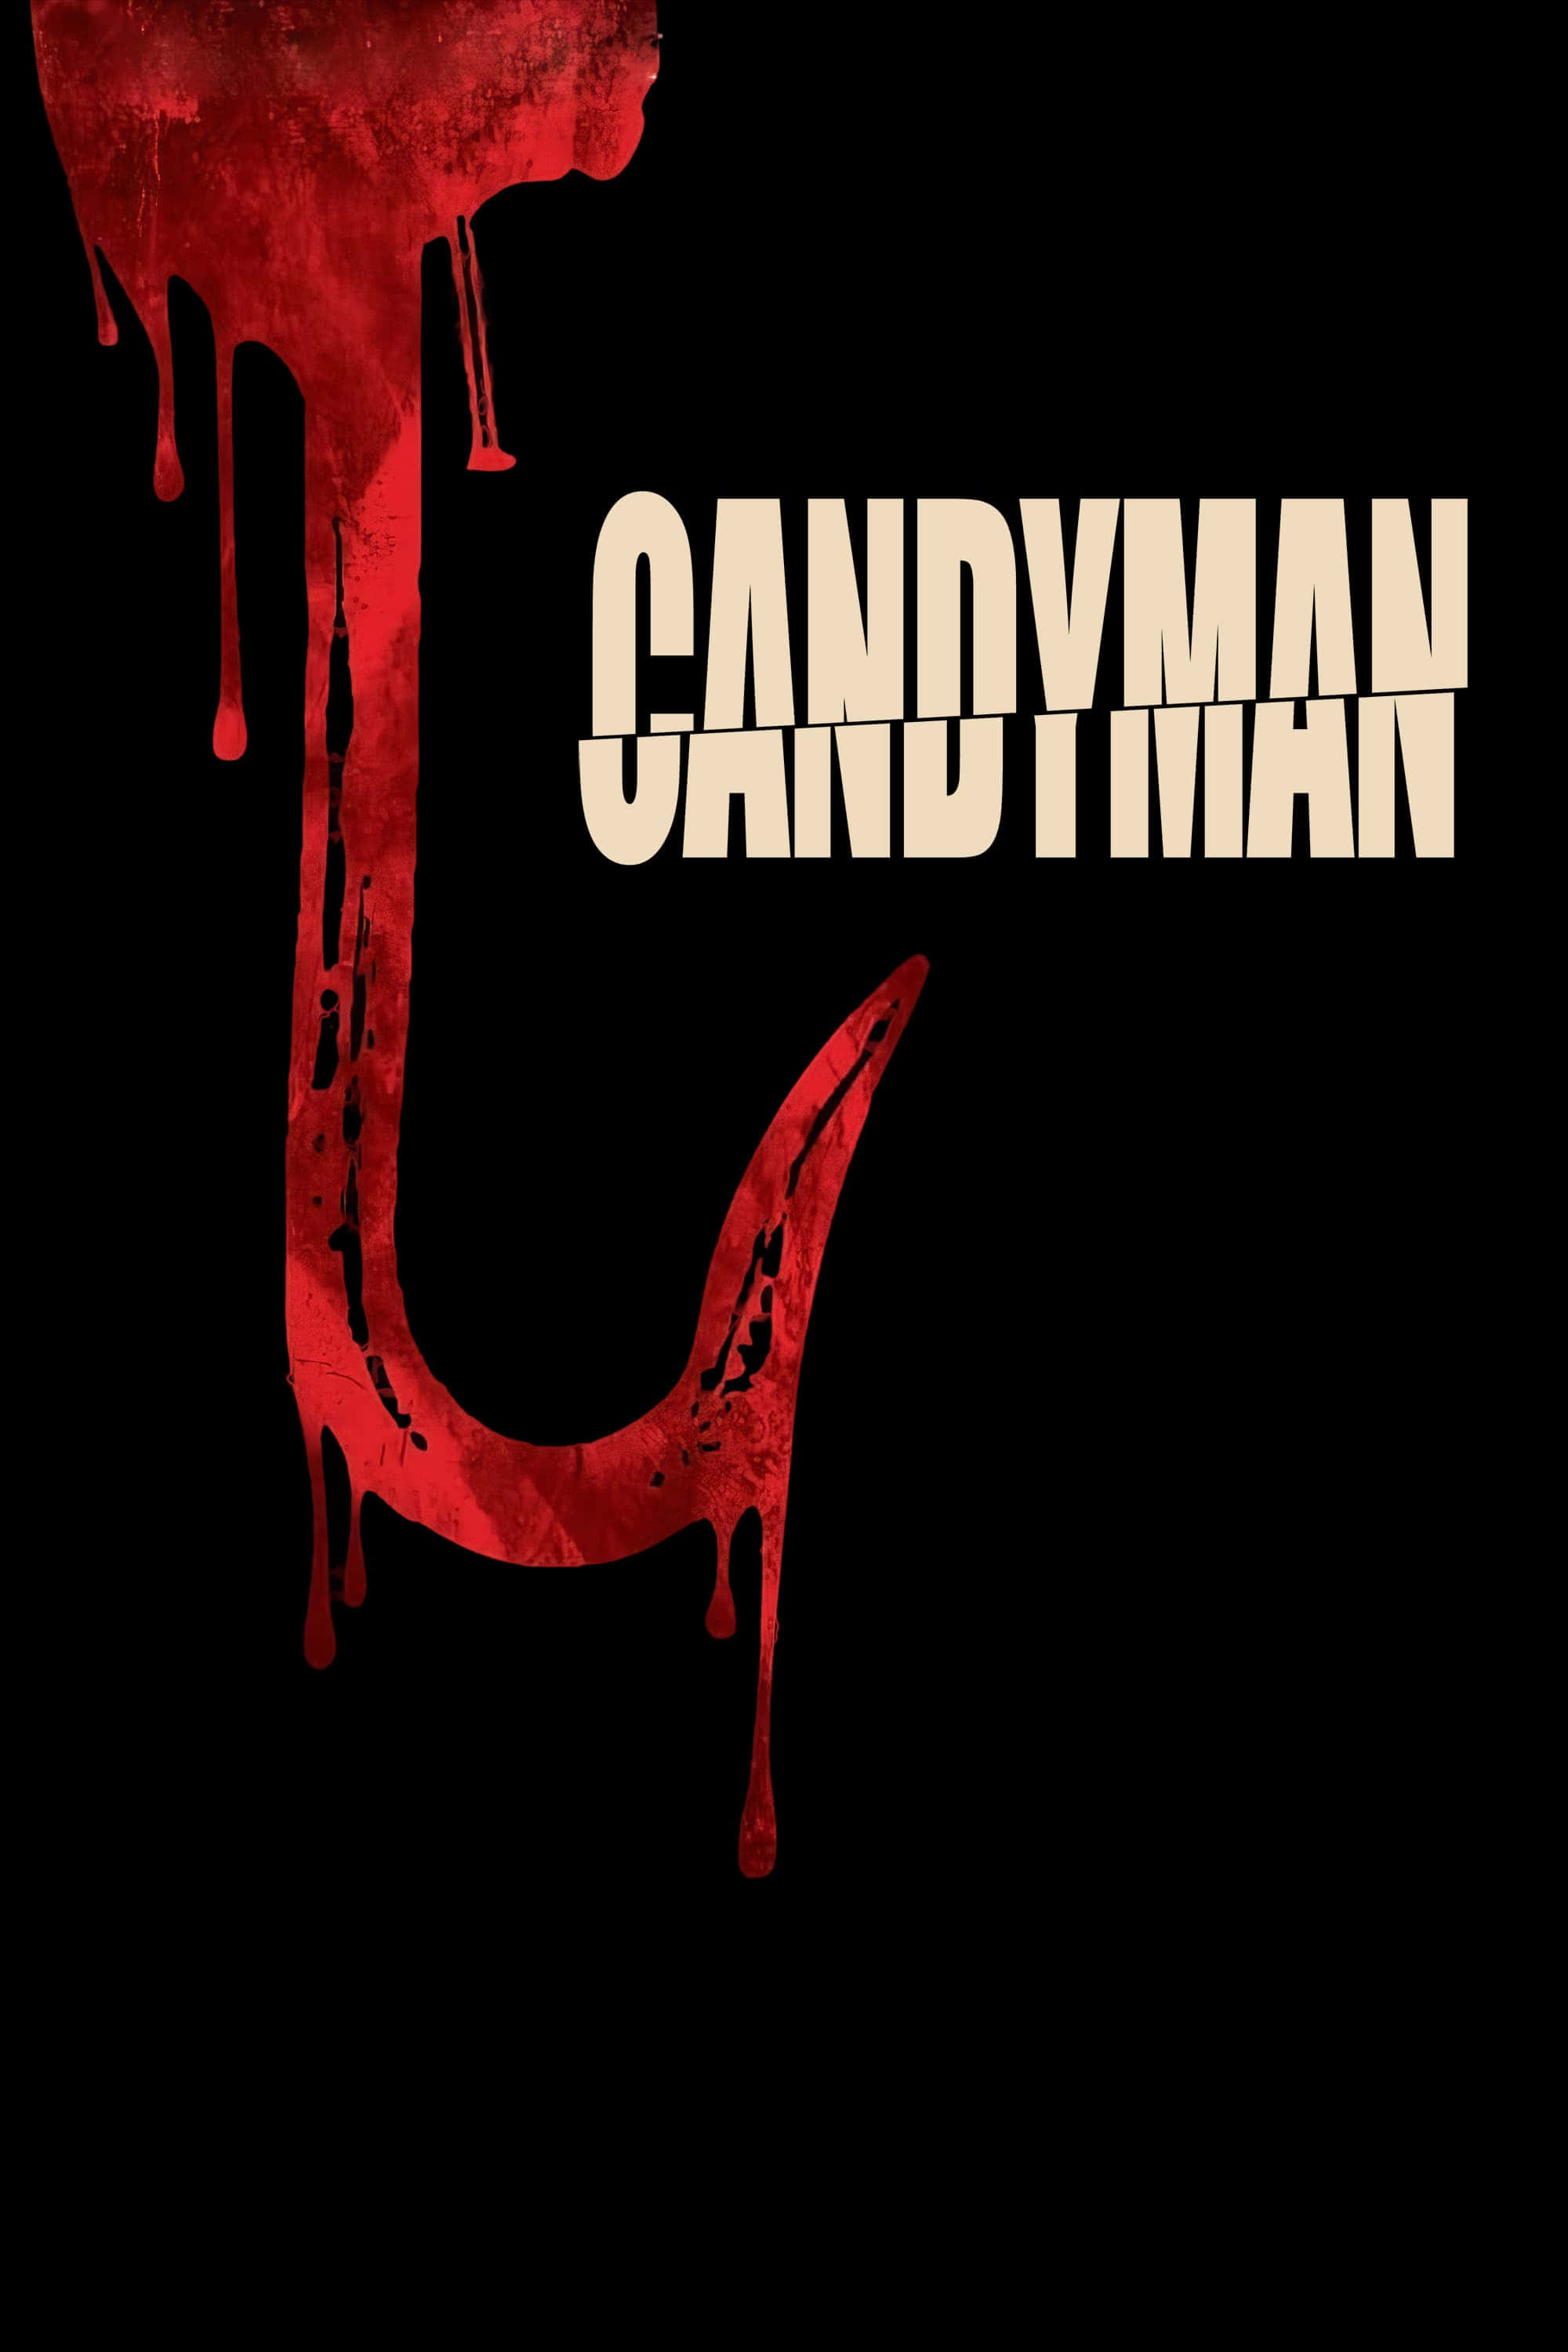 Experience all the terror of the Candyman, be his victim